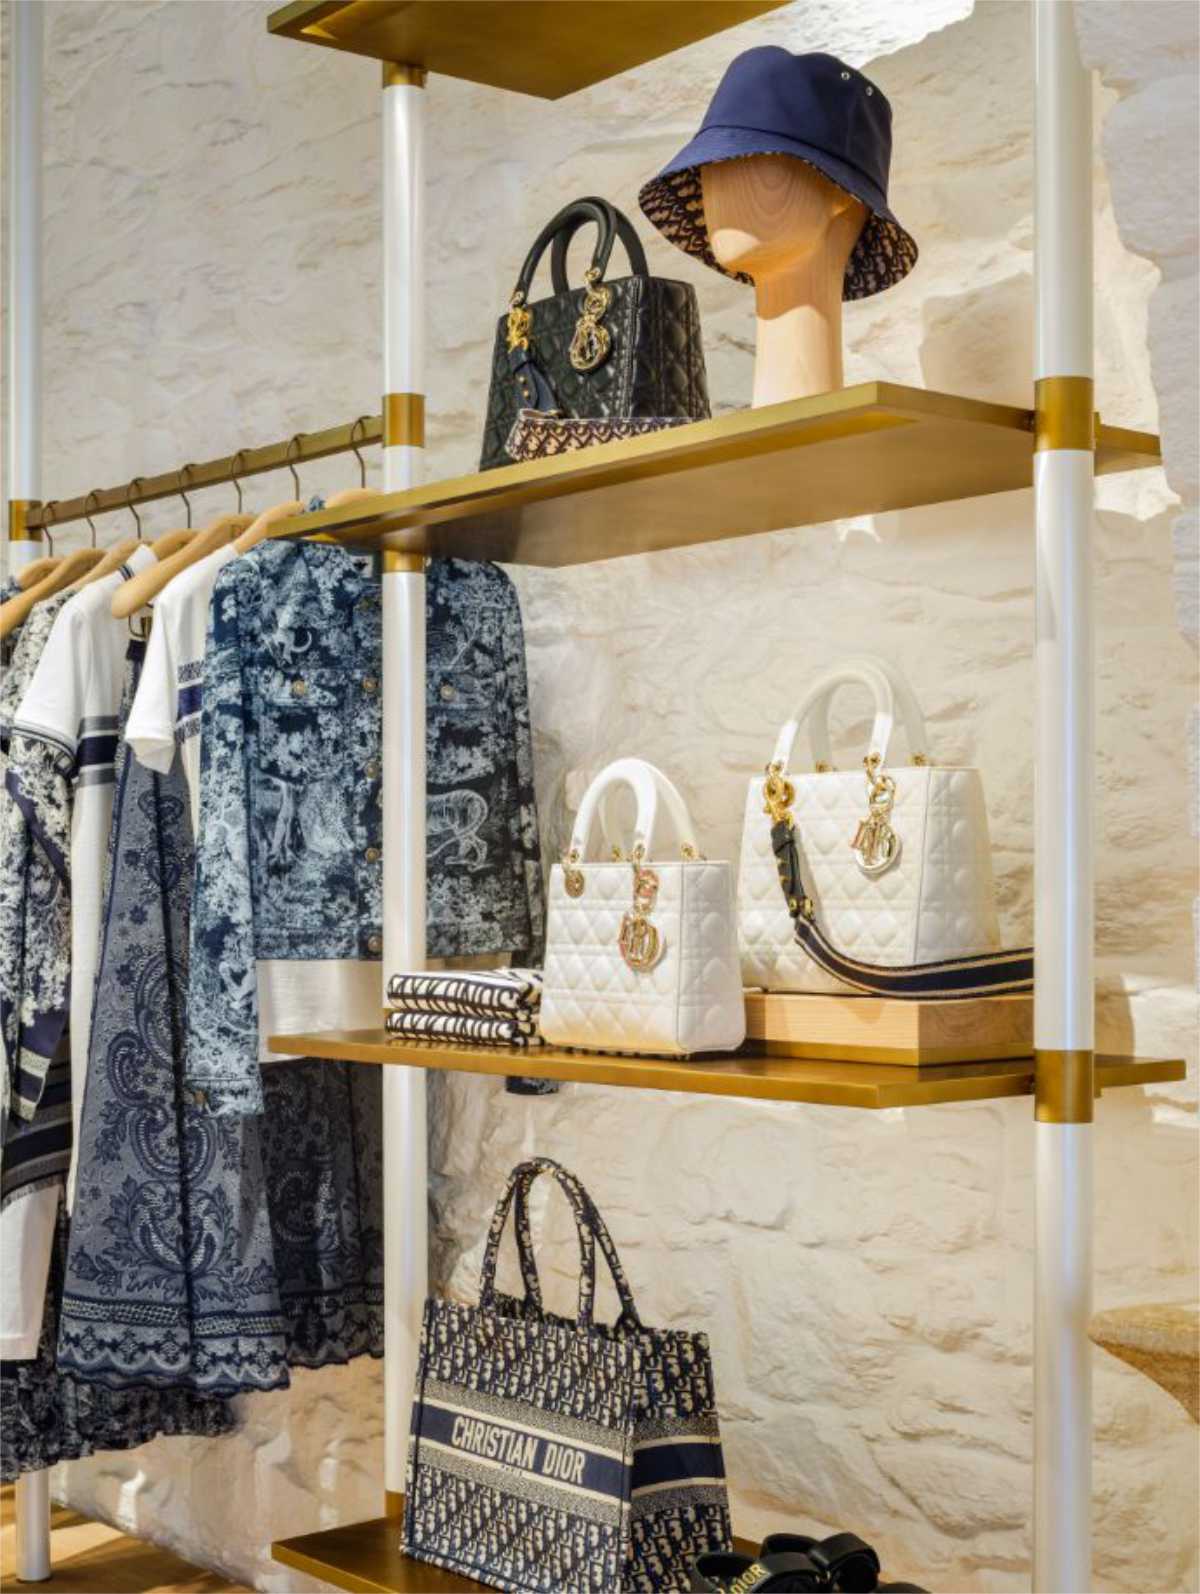 Discover the Dior Boutique in Mykonos